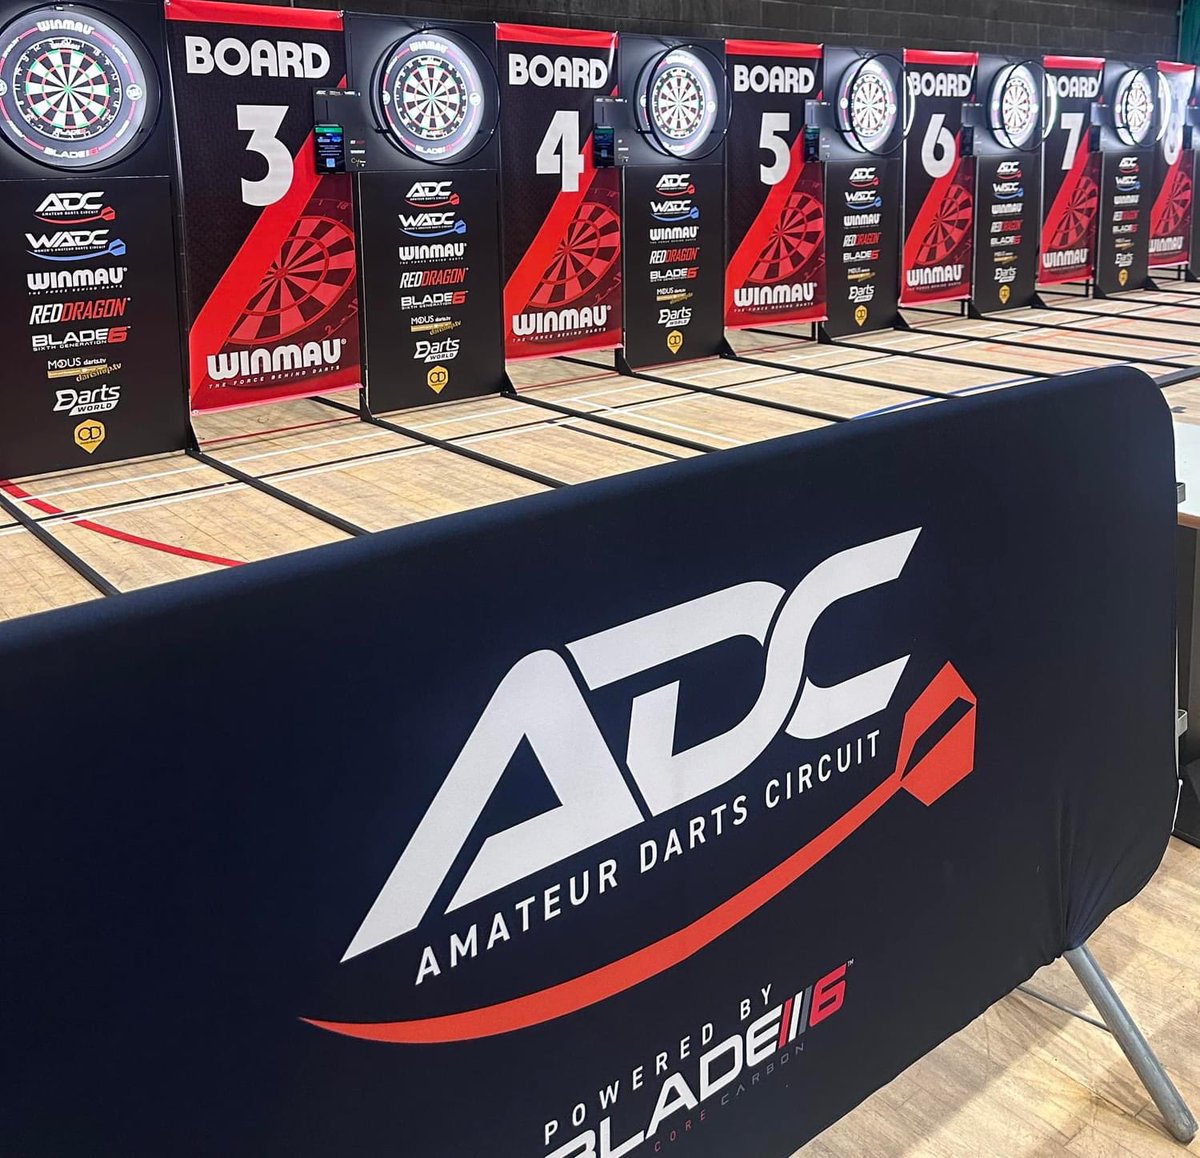 ⚡️ Winmau Championship Tour 2024 📍 Middlesbrough 25/26 May! ⛔️ Men’s events capped at 256 players 📲 Enter Men’s events here: tinyurl.com/MensWinmauTour… 📲 Enter Women’s events here: tinyurl.com/WomensWinmauTo… 📲 All info here: uk.dartscircuit.com/tour @Winmau @MSSdarts…